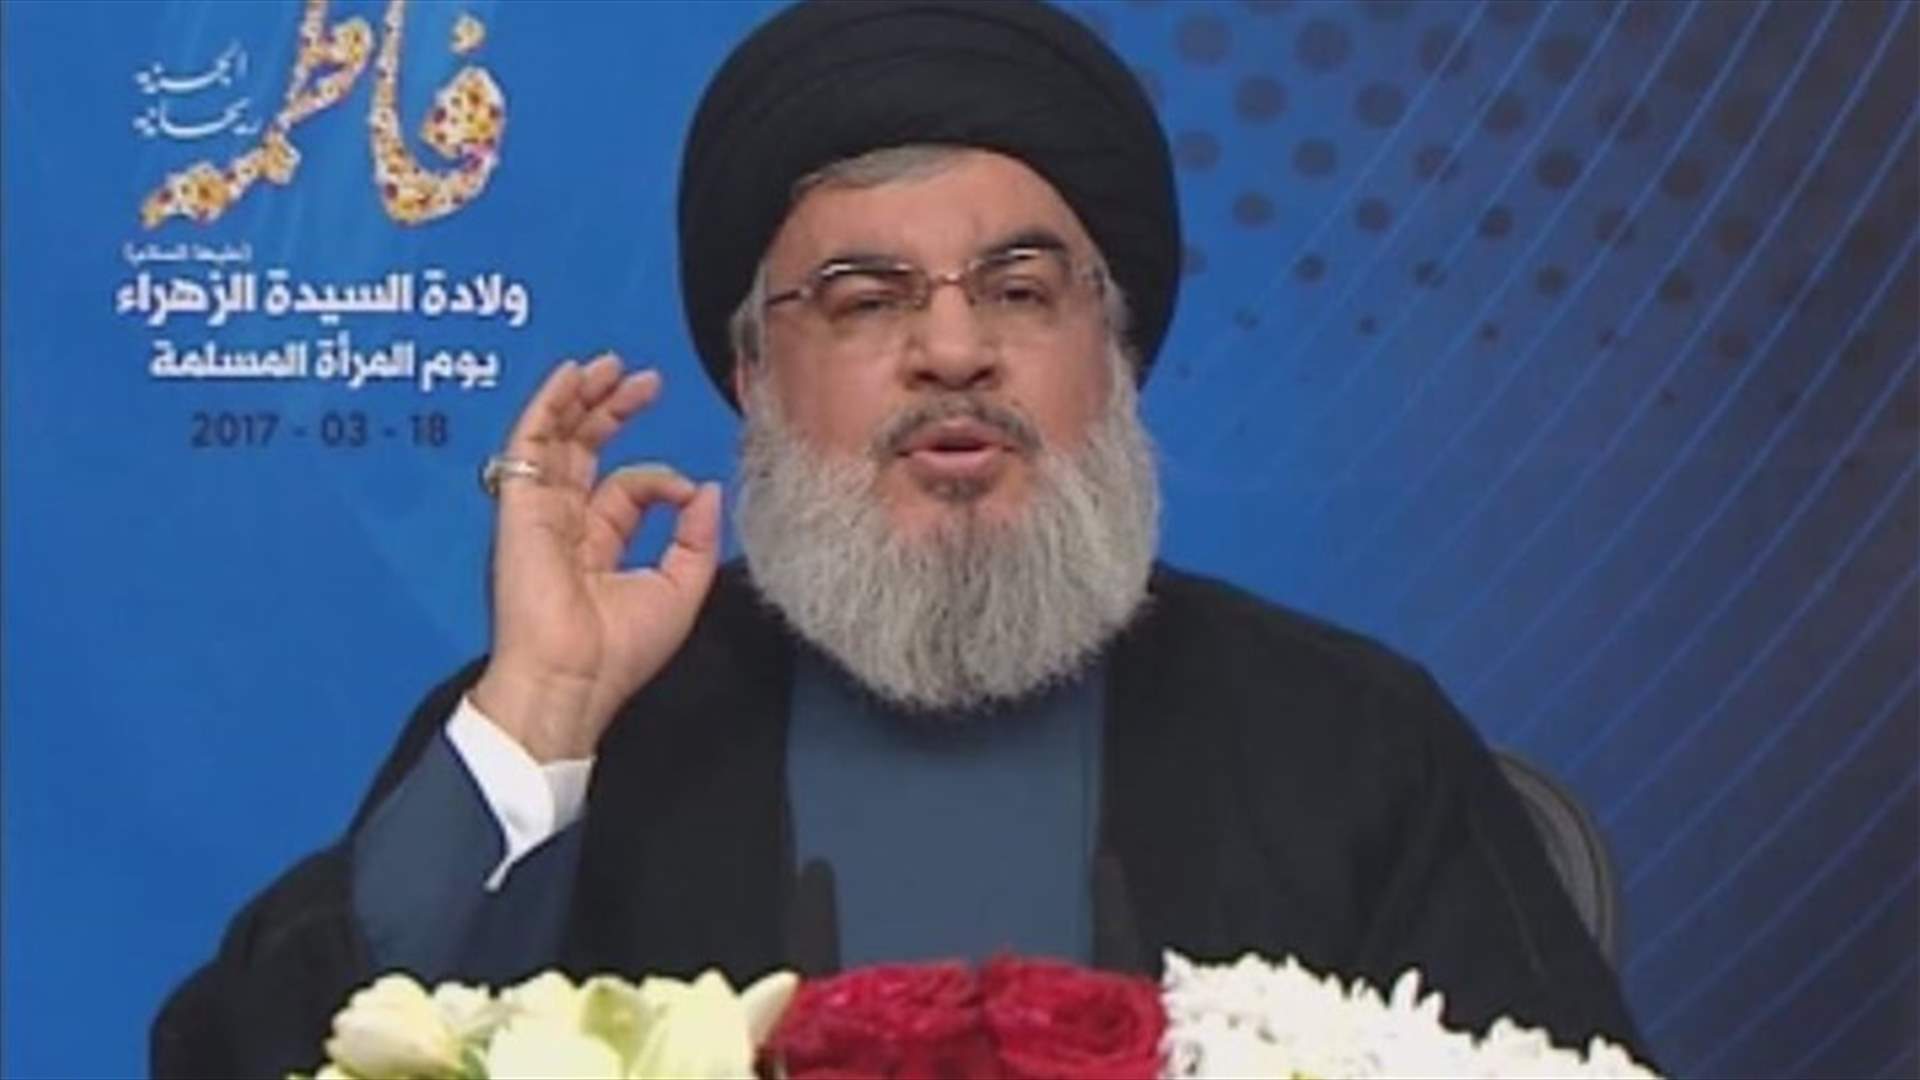 Nasrallah says they will present comprehensive proposal on tax alternatives